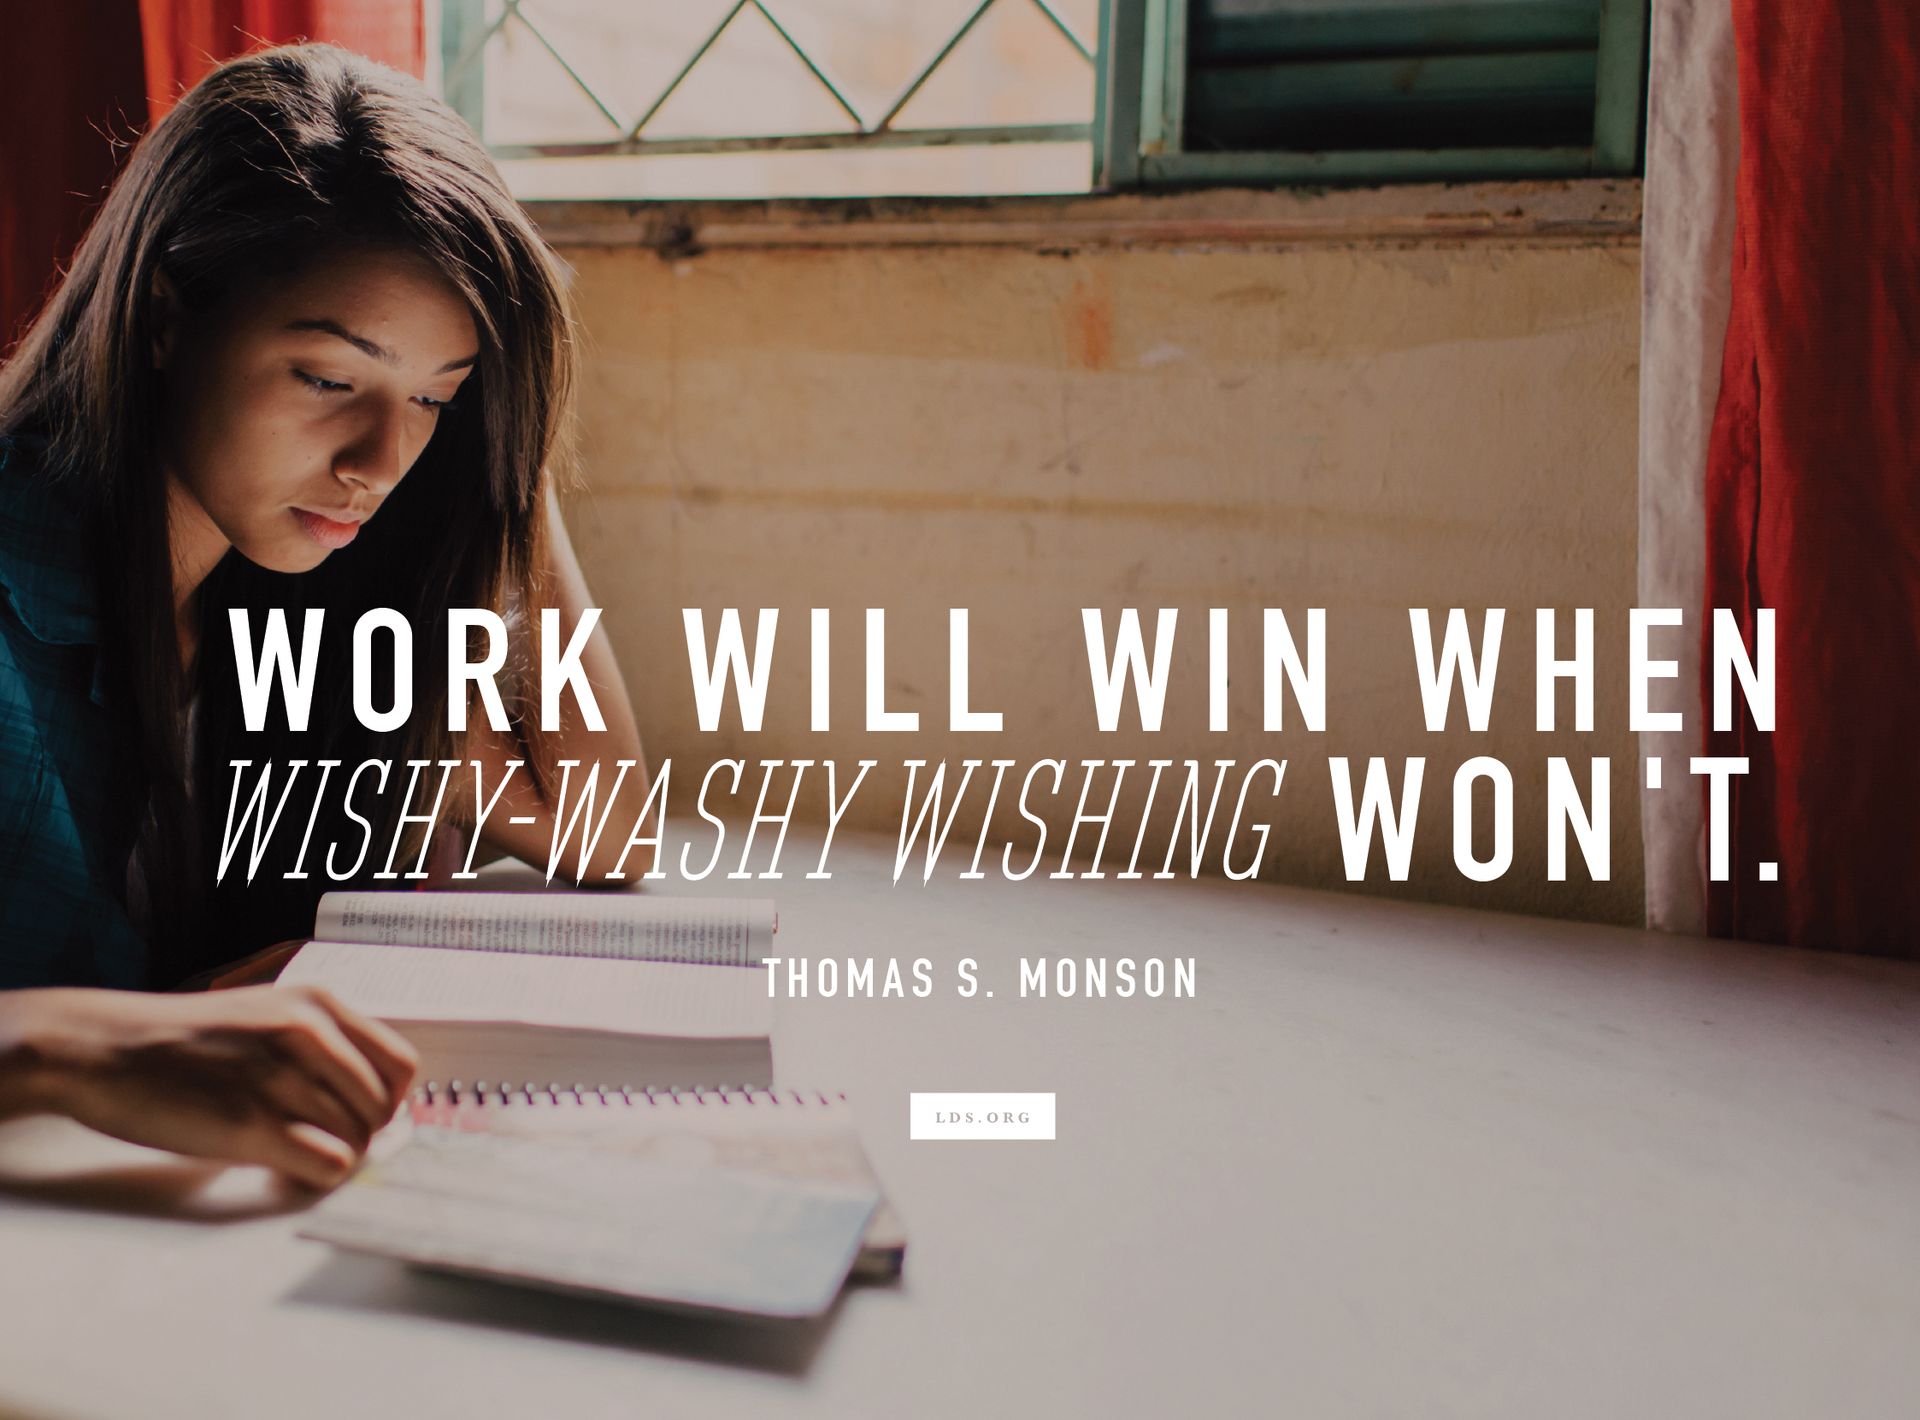 “Work will win when wishy-washy wishing won’t.” —President Thomas S. Monson, “Seven Steps to Success with Aaronic Priesthood Youth”